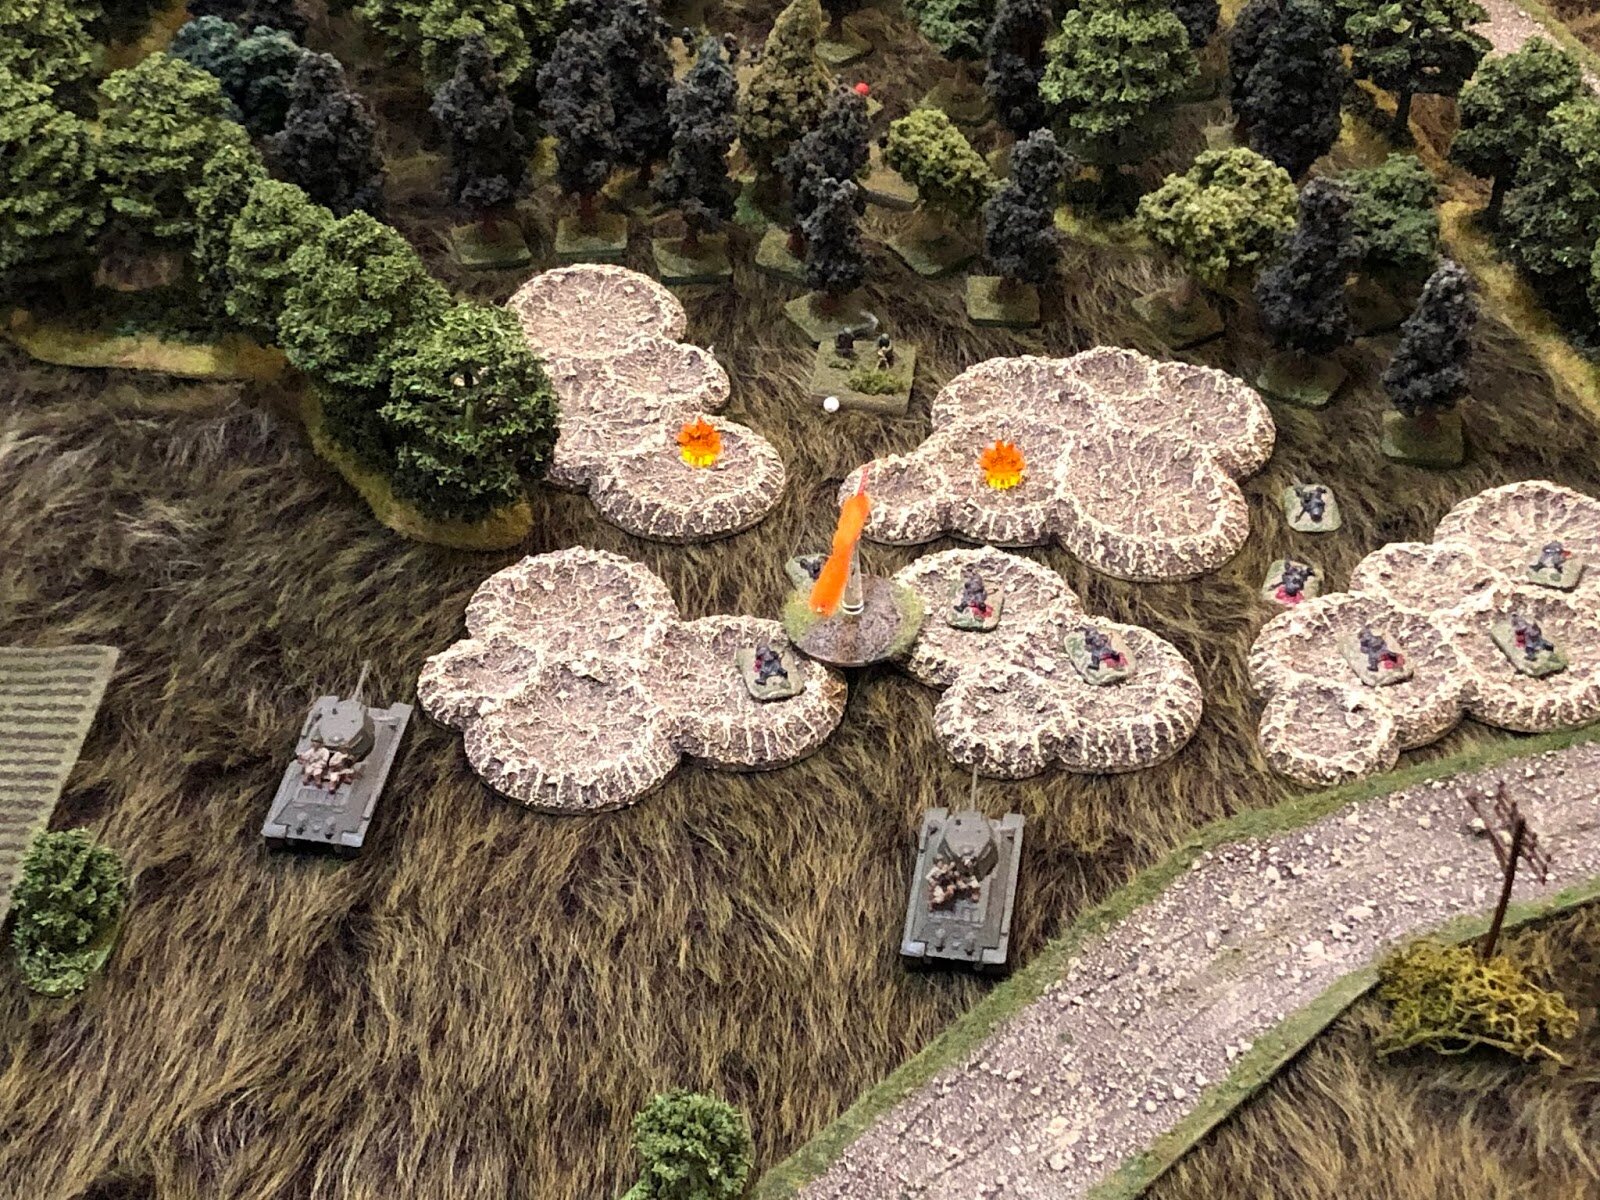  They open fire with their main guns and MGs at point blank range, but there's really no one left on the objective, they're all cowering deeper in the forest (top center). 